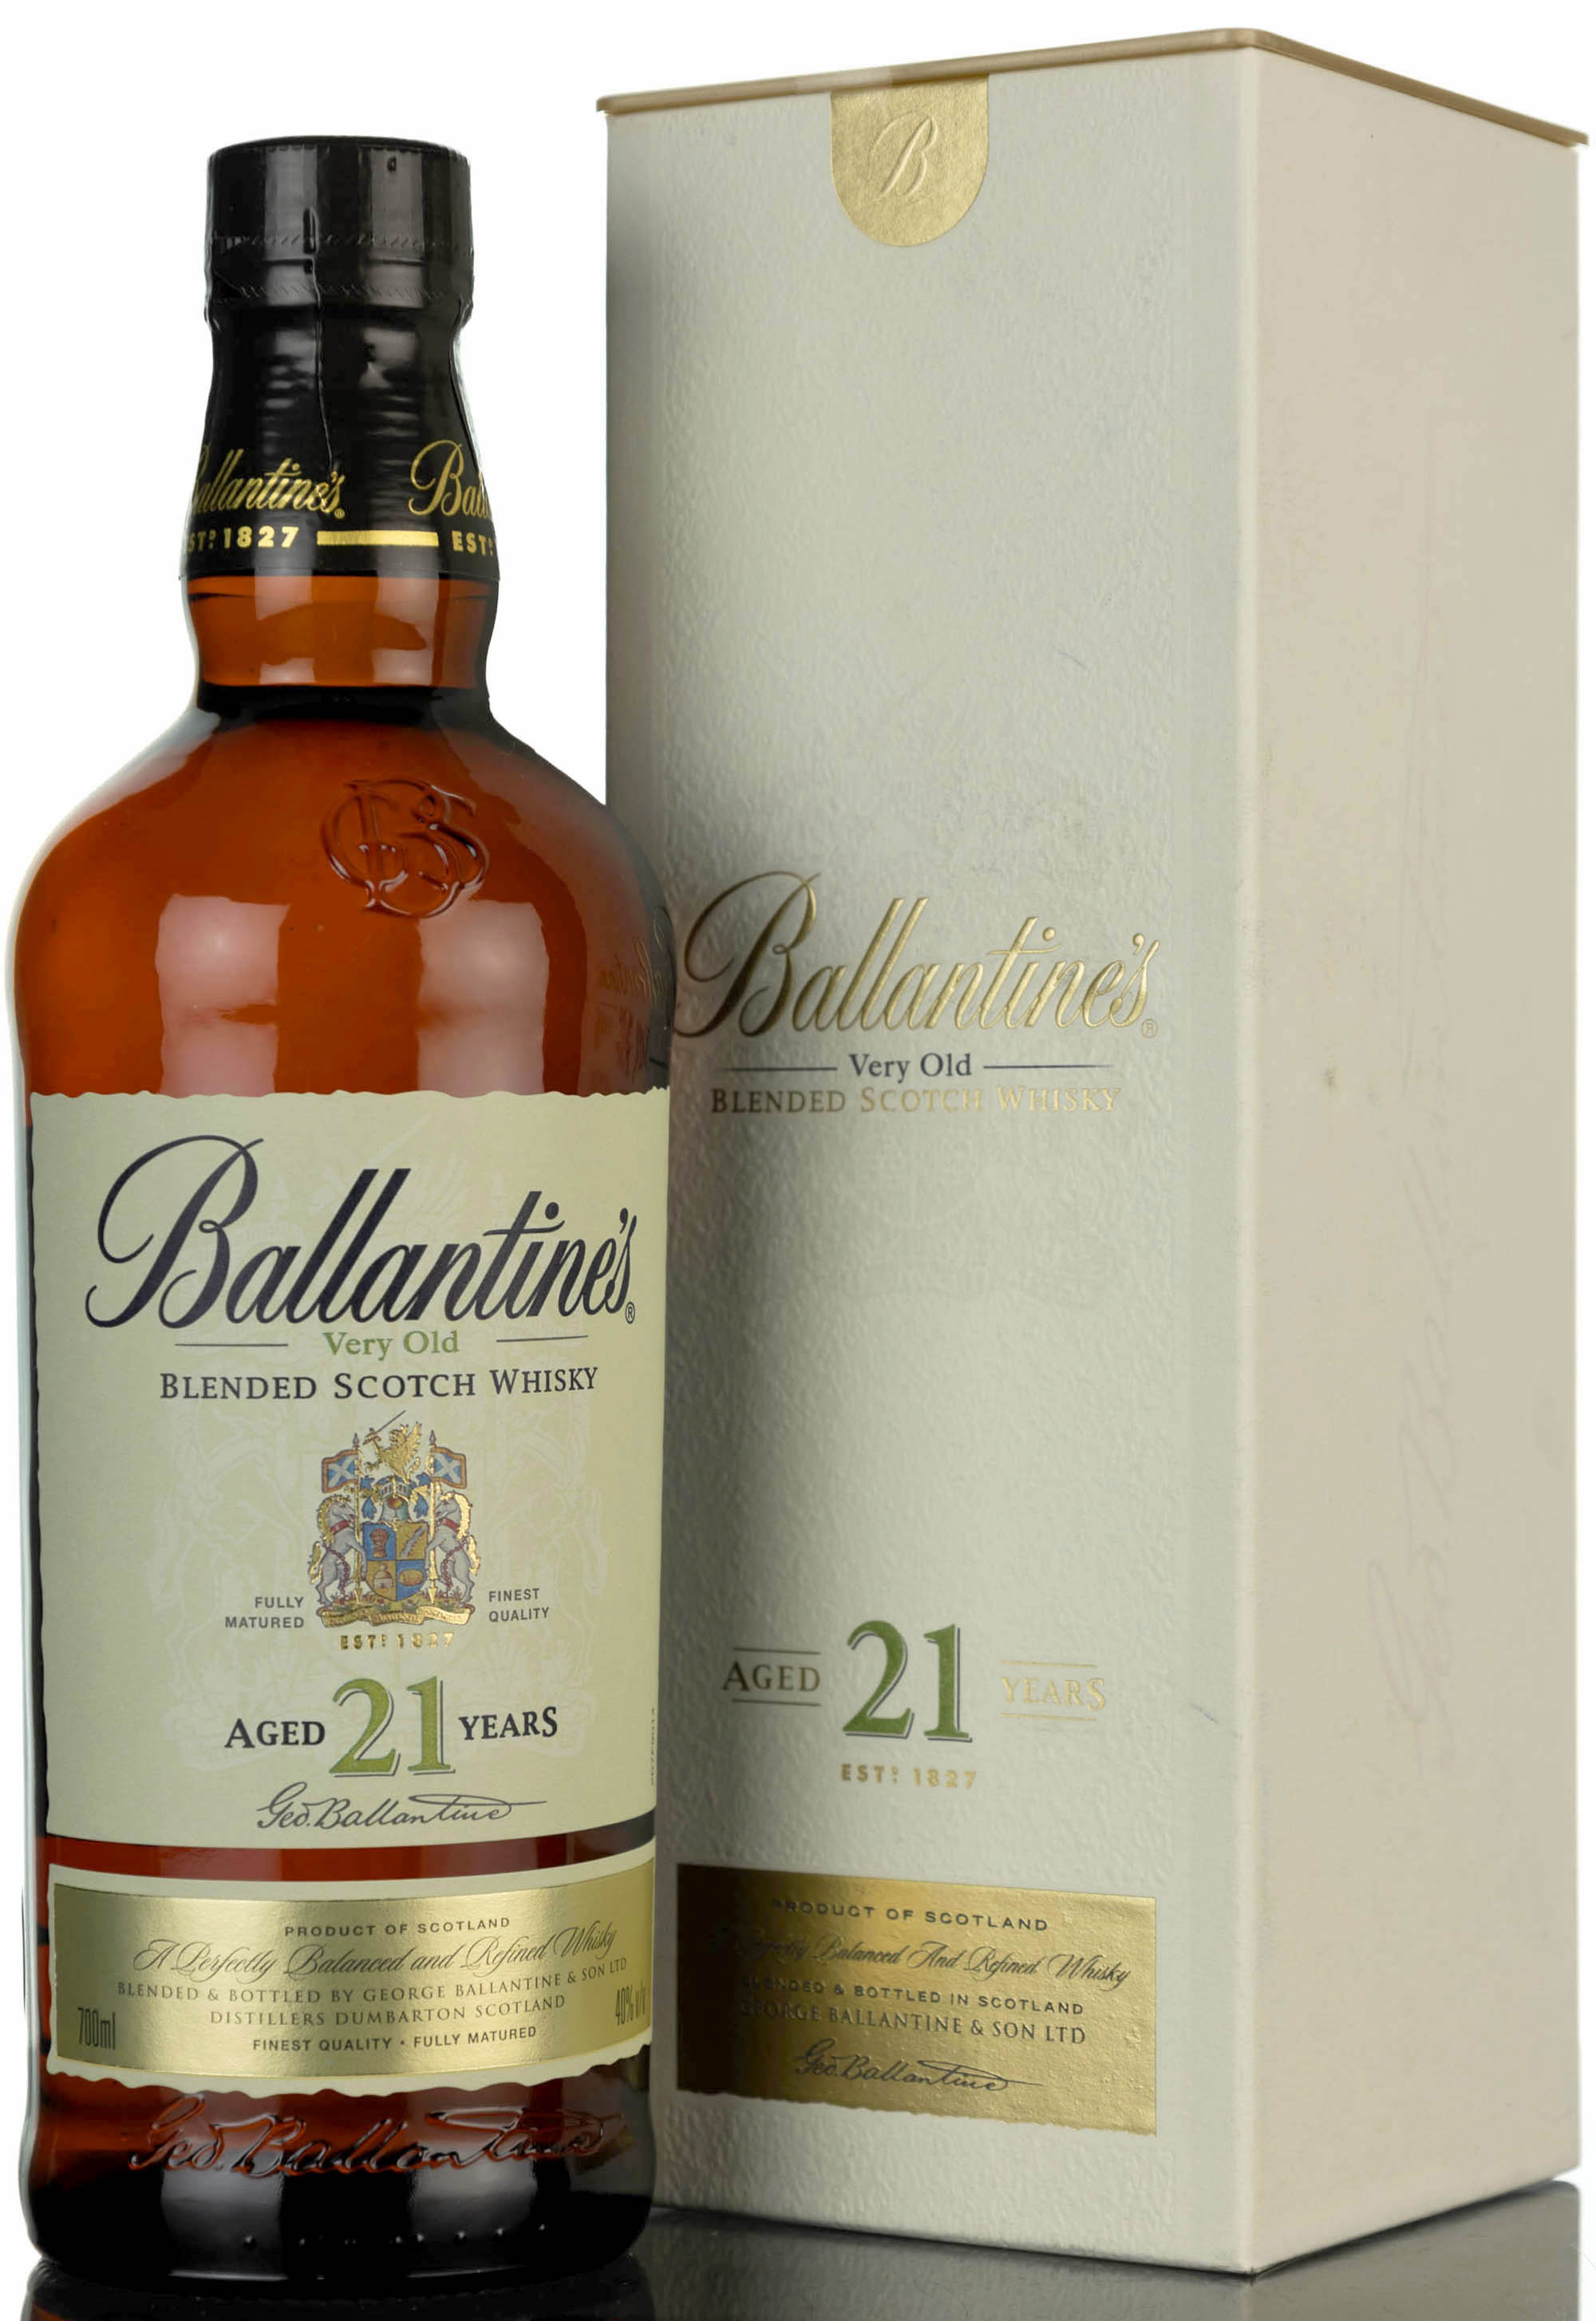 Ballantines 21 Year Old - 2016 Release